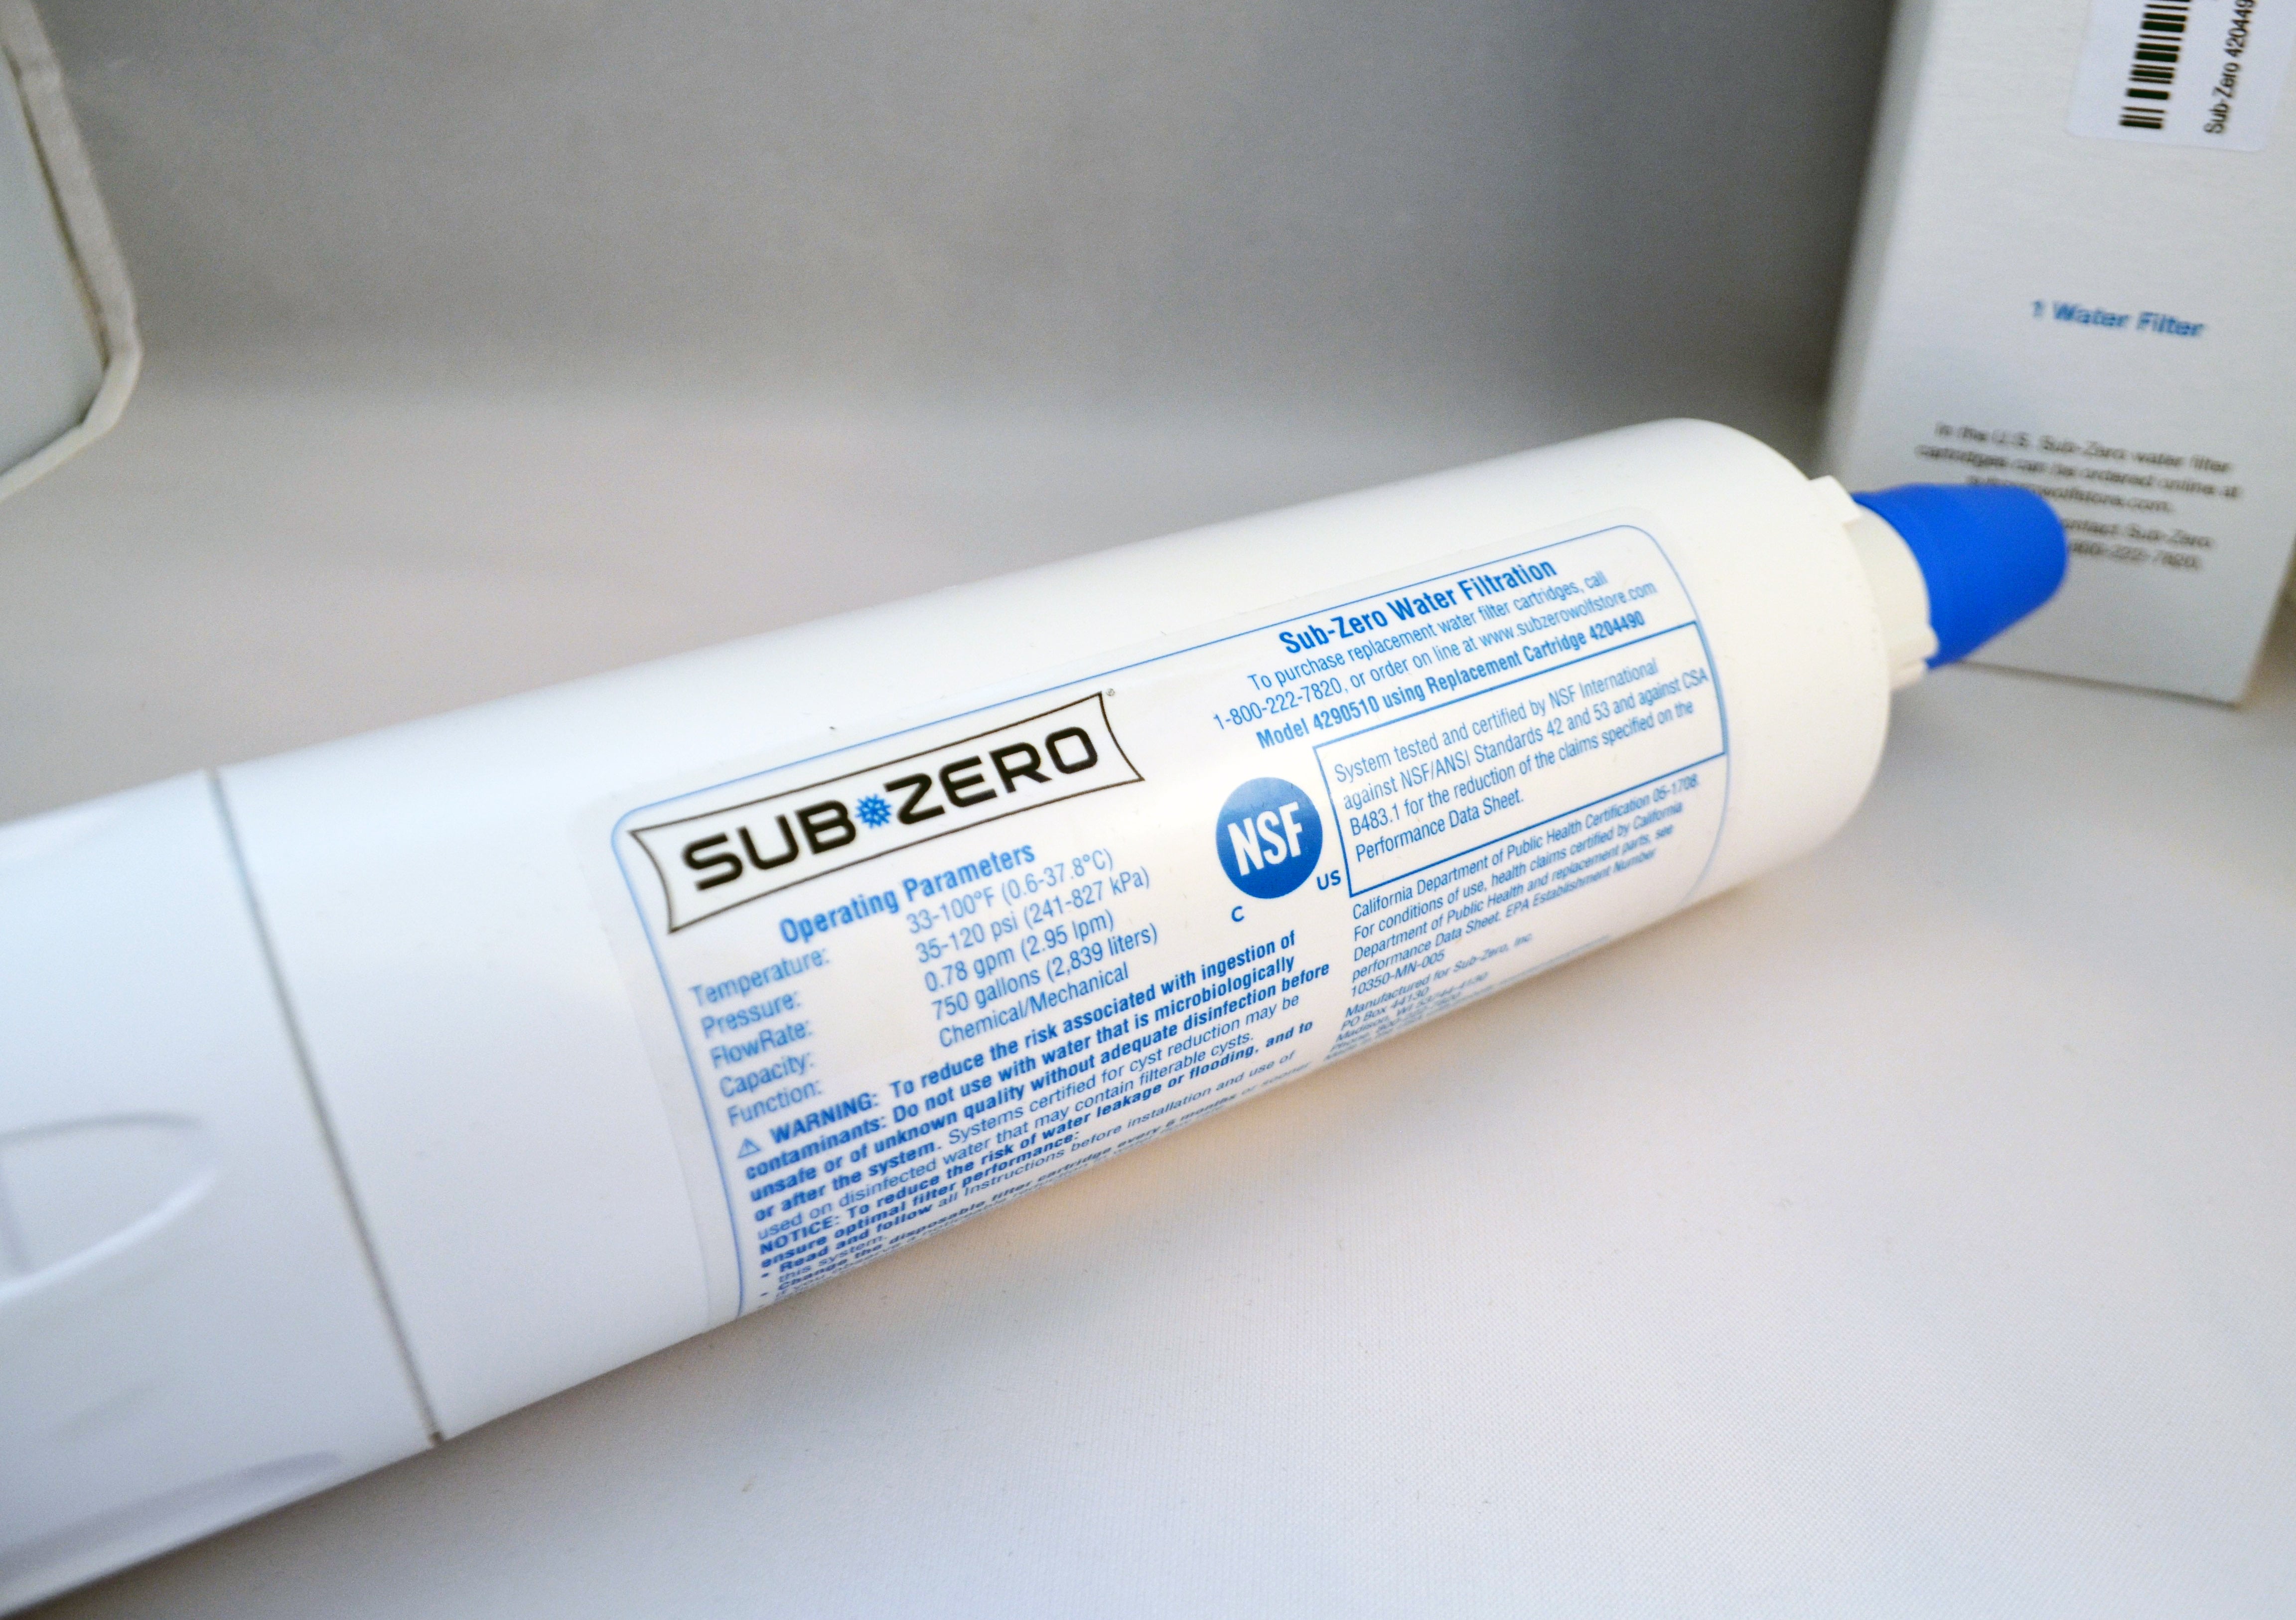 How to Replace a Sub-Zero 4204490 Water Filter